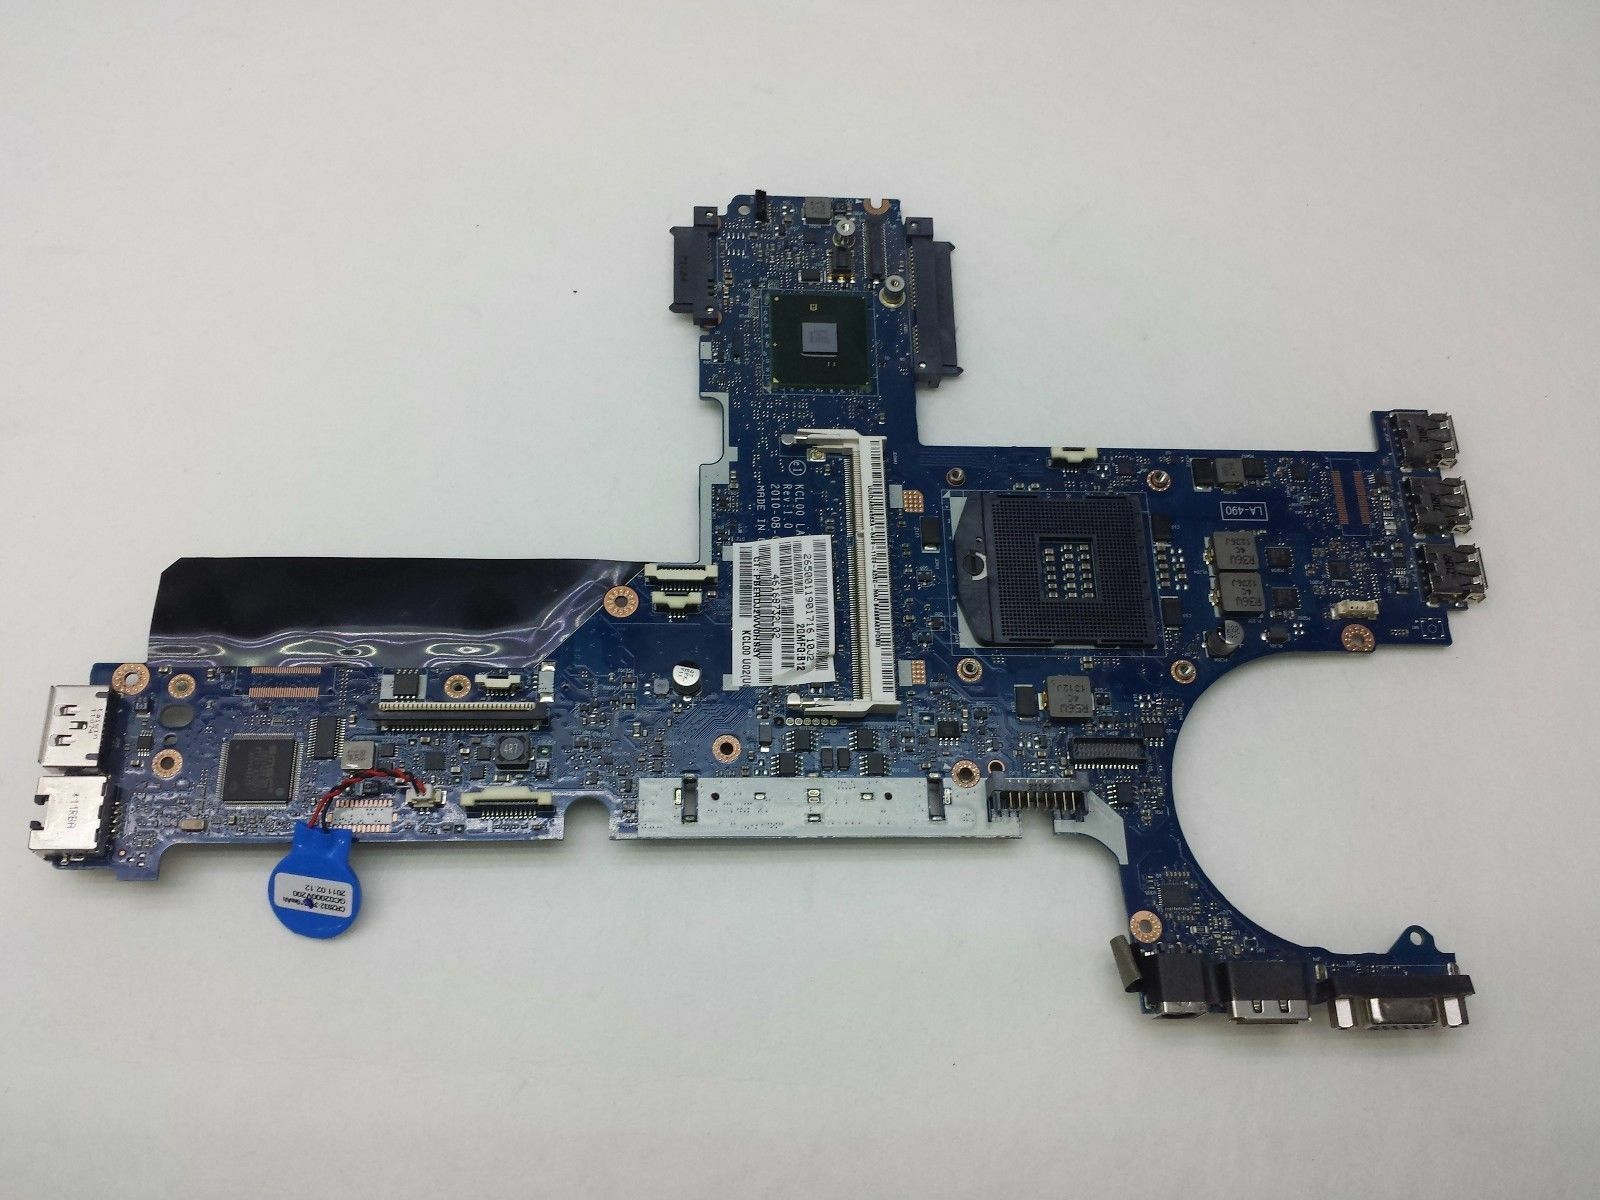 594028-001 S989 Motherboard For HP Elitebook 8440P Laptop, KCL00 LA-4902P, A Brand: HP Number of Memory S